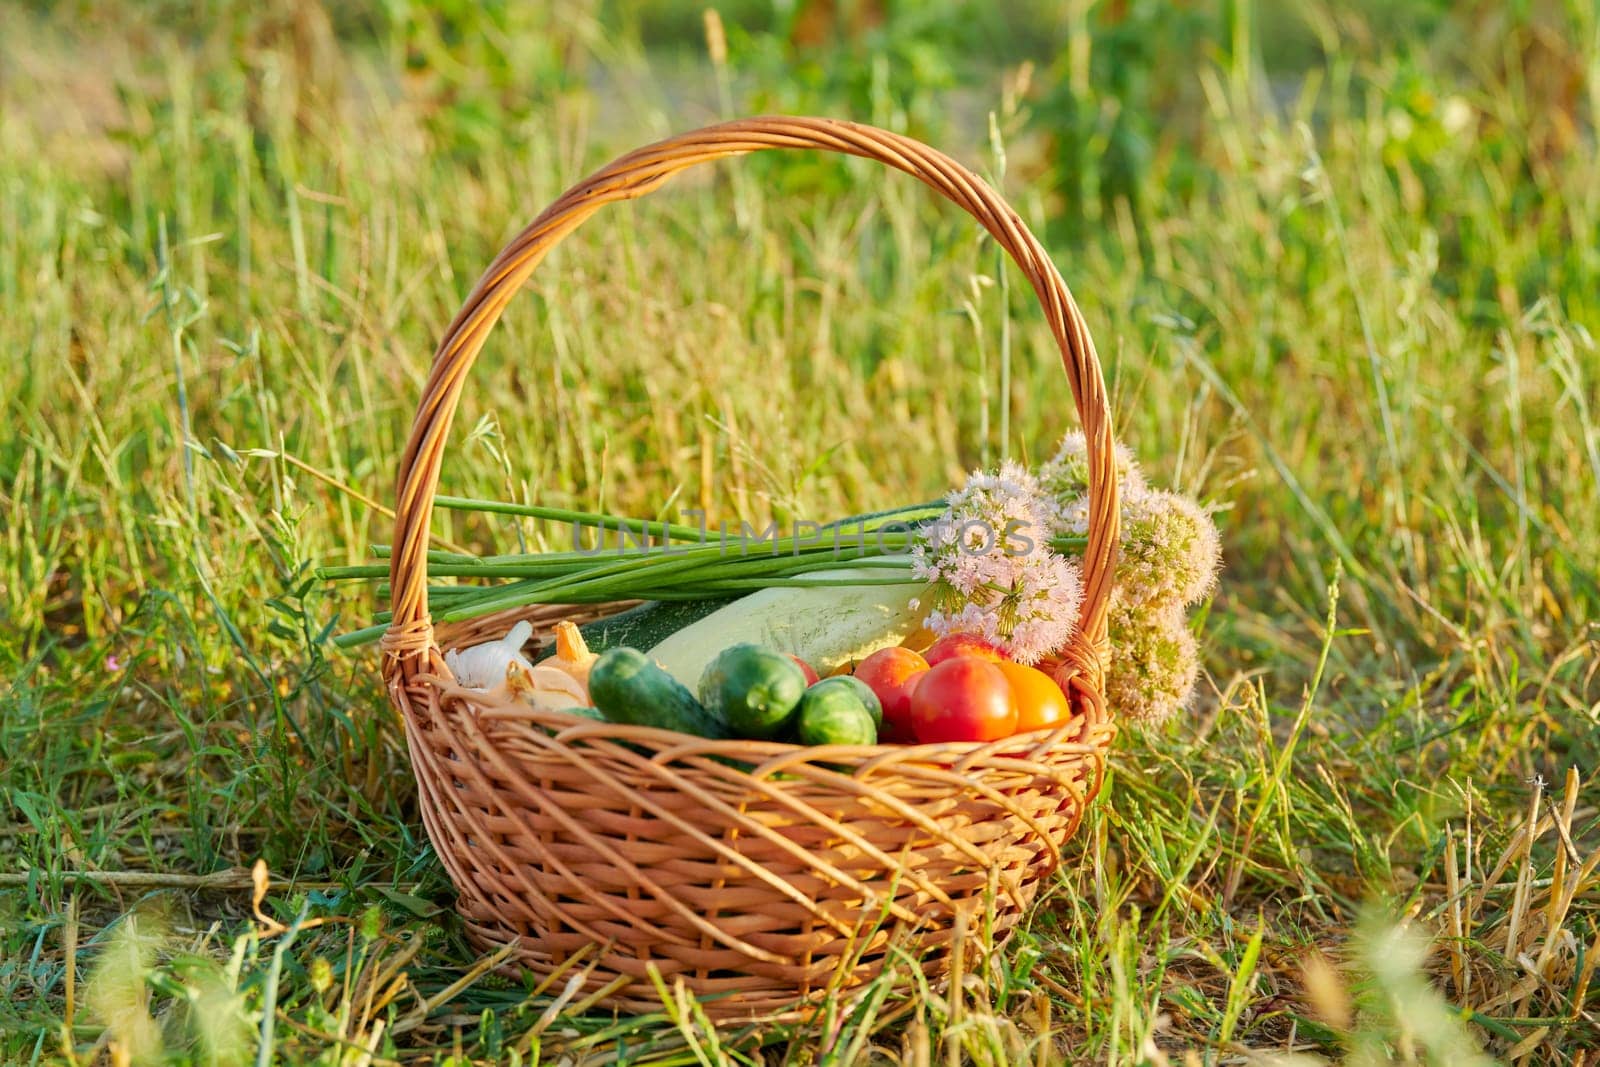 Basket with ripe vegetables on grass outdoor, nobody. Natural healthy organic vegetables, summer autumn season, agriculture, gardening, farming concept